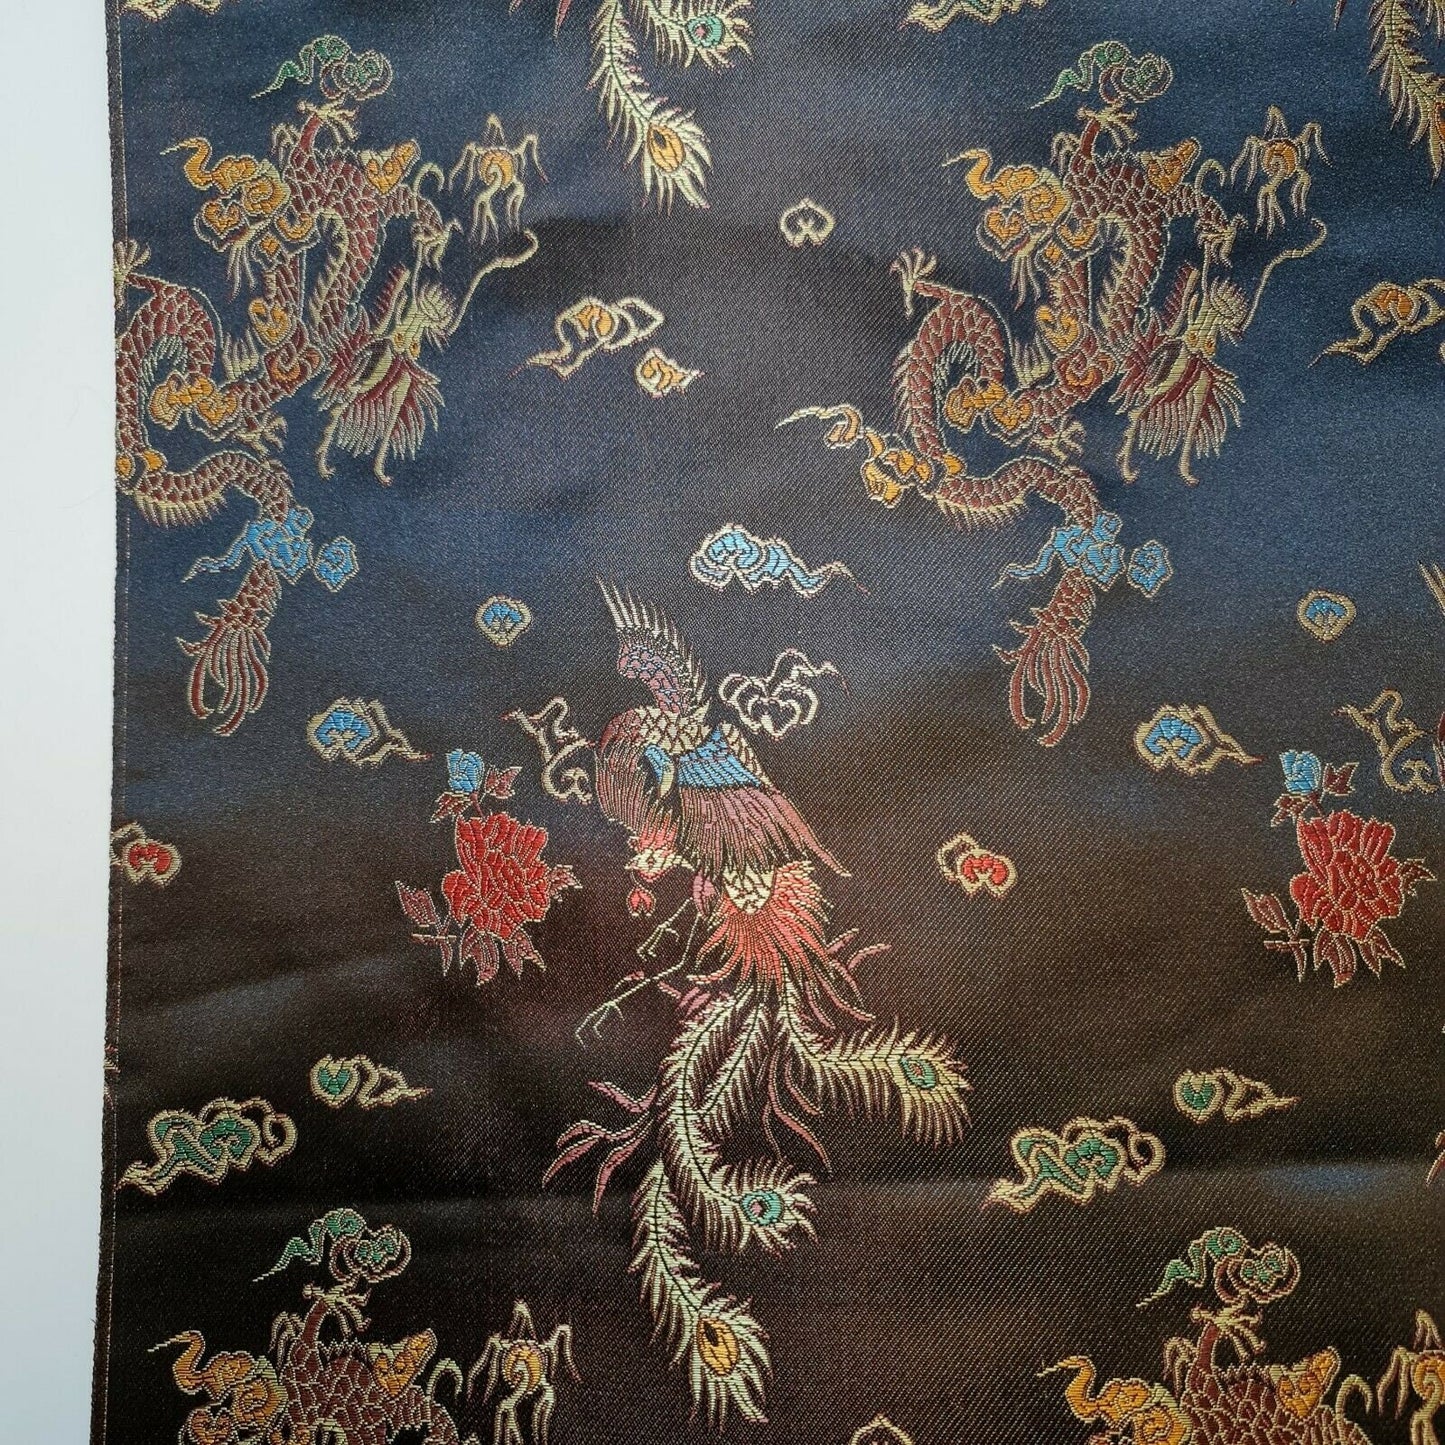 Traditional Chinese Embroidered Brocade Poly Silky Satin Oriental Dragon Print By the Meter (Black- Brown)